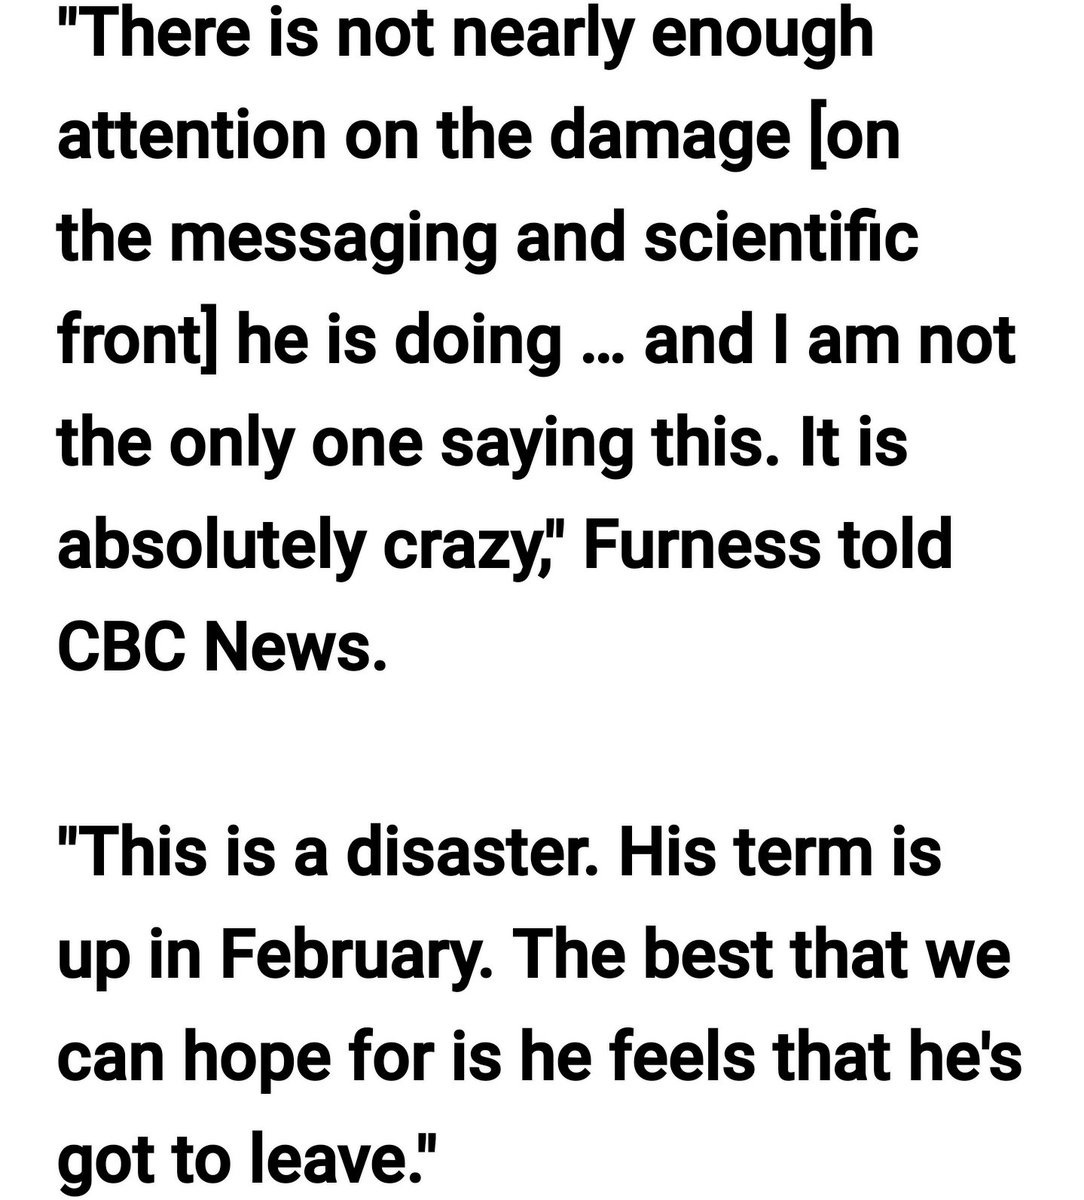 And worse, Ford claims it's science with Doctor Williams providing cover. Science tells them to delay they tell us.Meanwhile actual scientists and doctors, who are not exactly known for fiery language, are calling them "absolutely crazy".